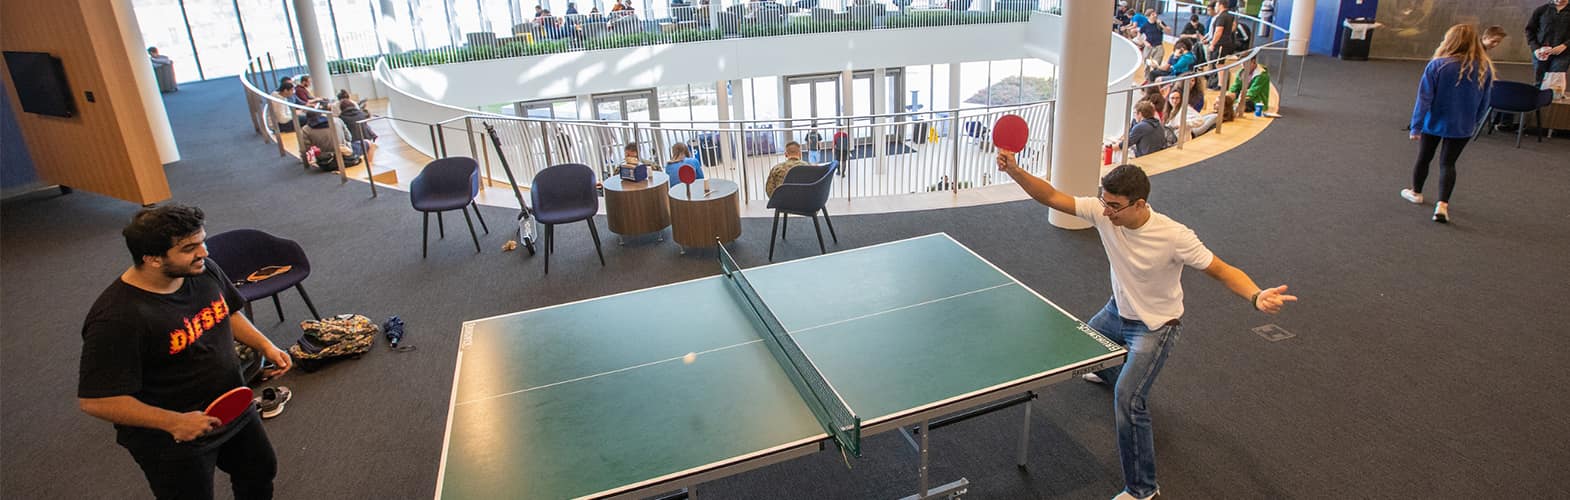 Students play ping pong in the Student Union